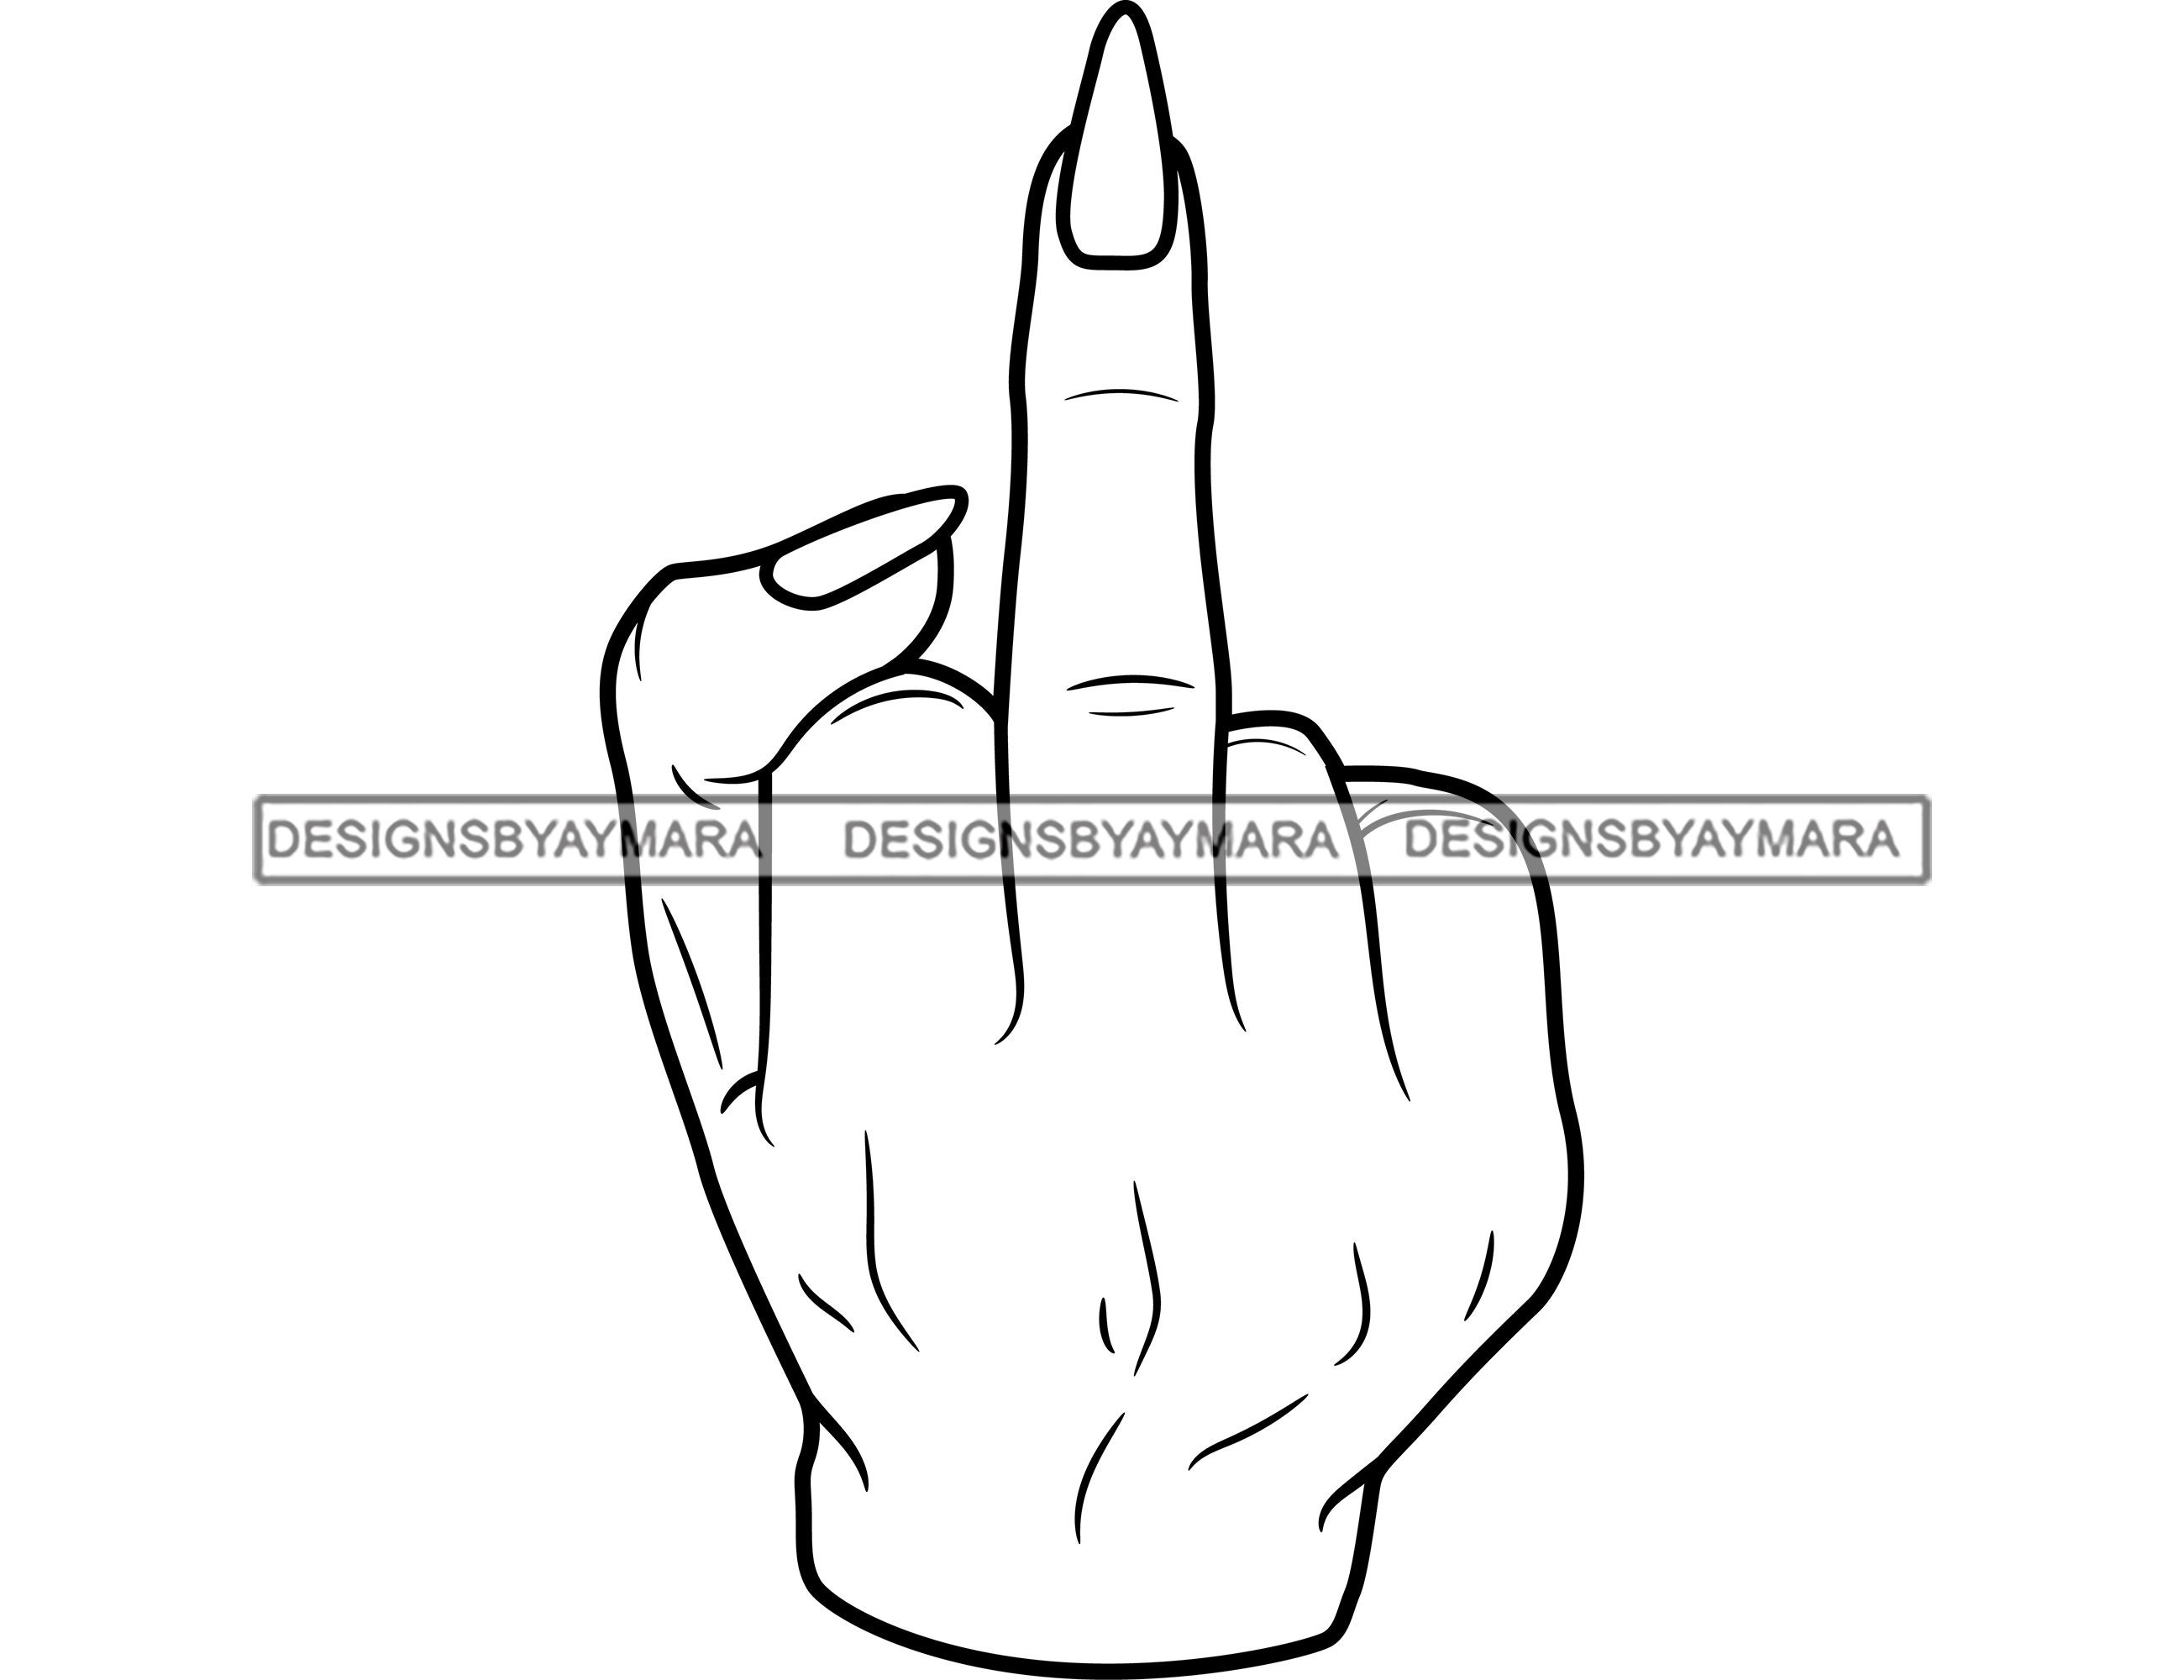 Black Woman Hands Middle Finger Heart Quote Obscene Gesture Tattoo Ink Art SVG PNG JPG Clipart Vector Designs Silhouette Cricut Cut Cutting